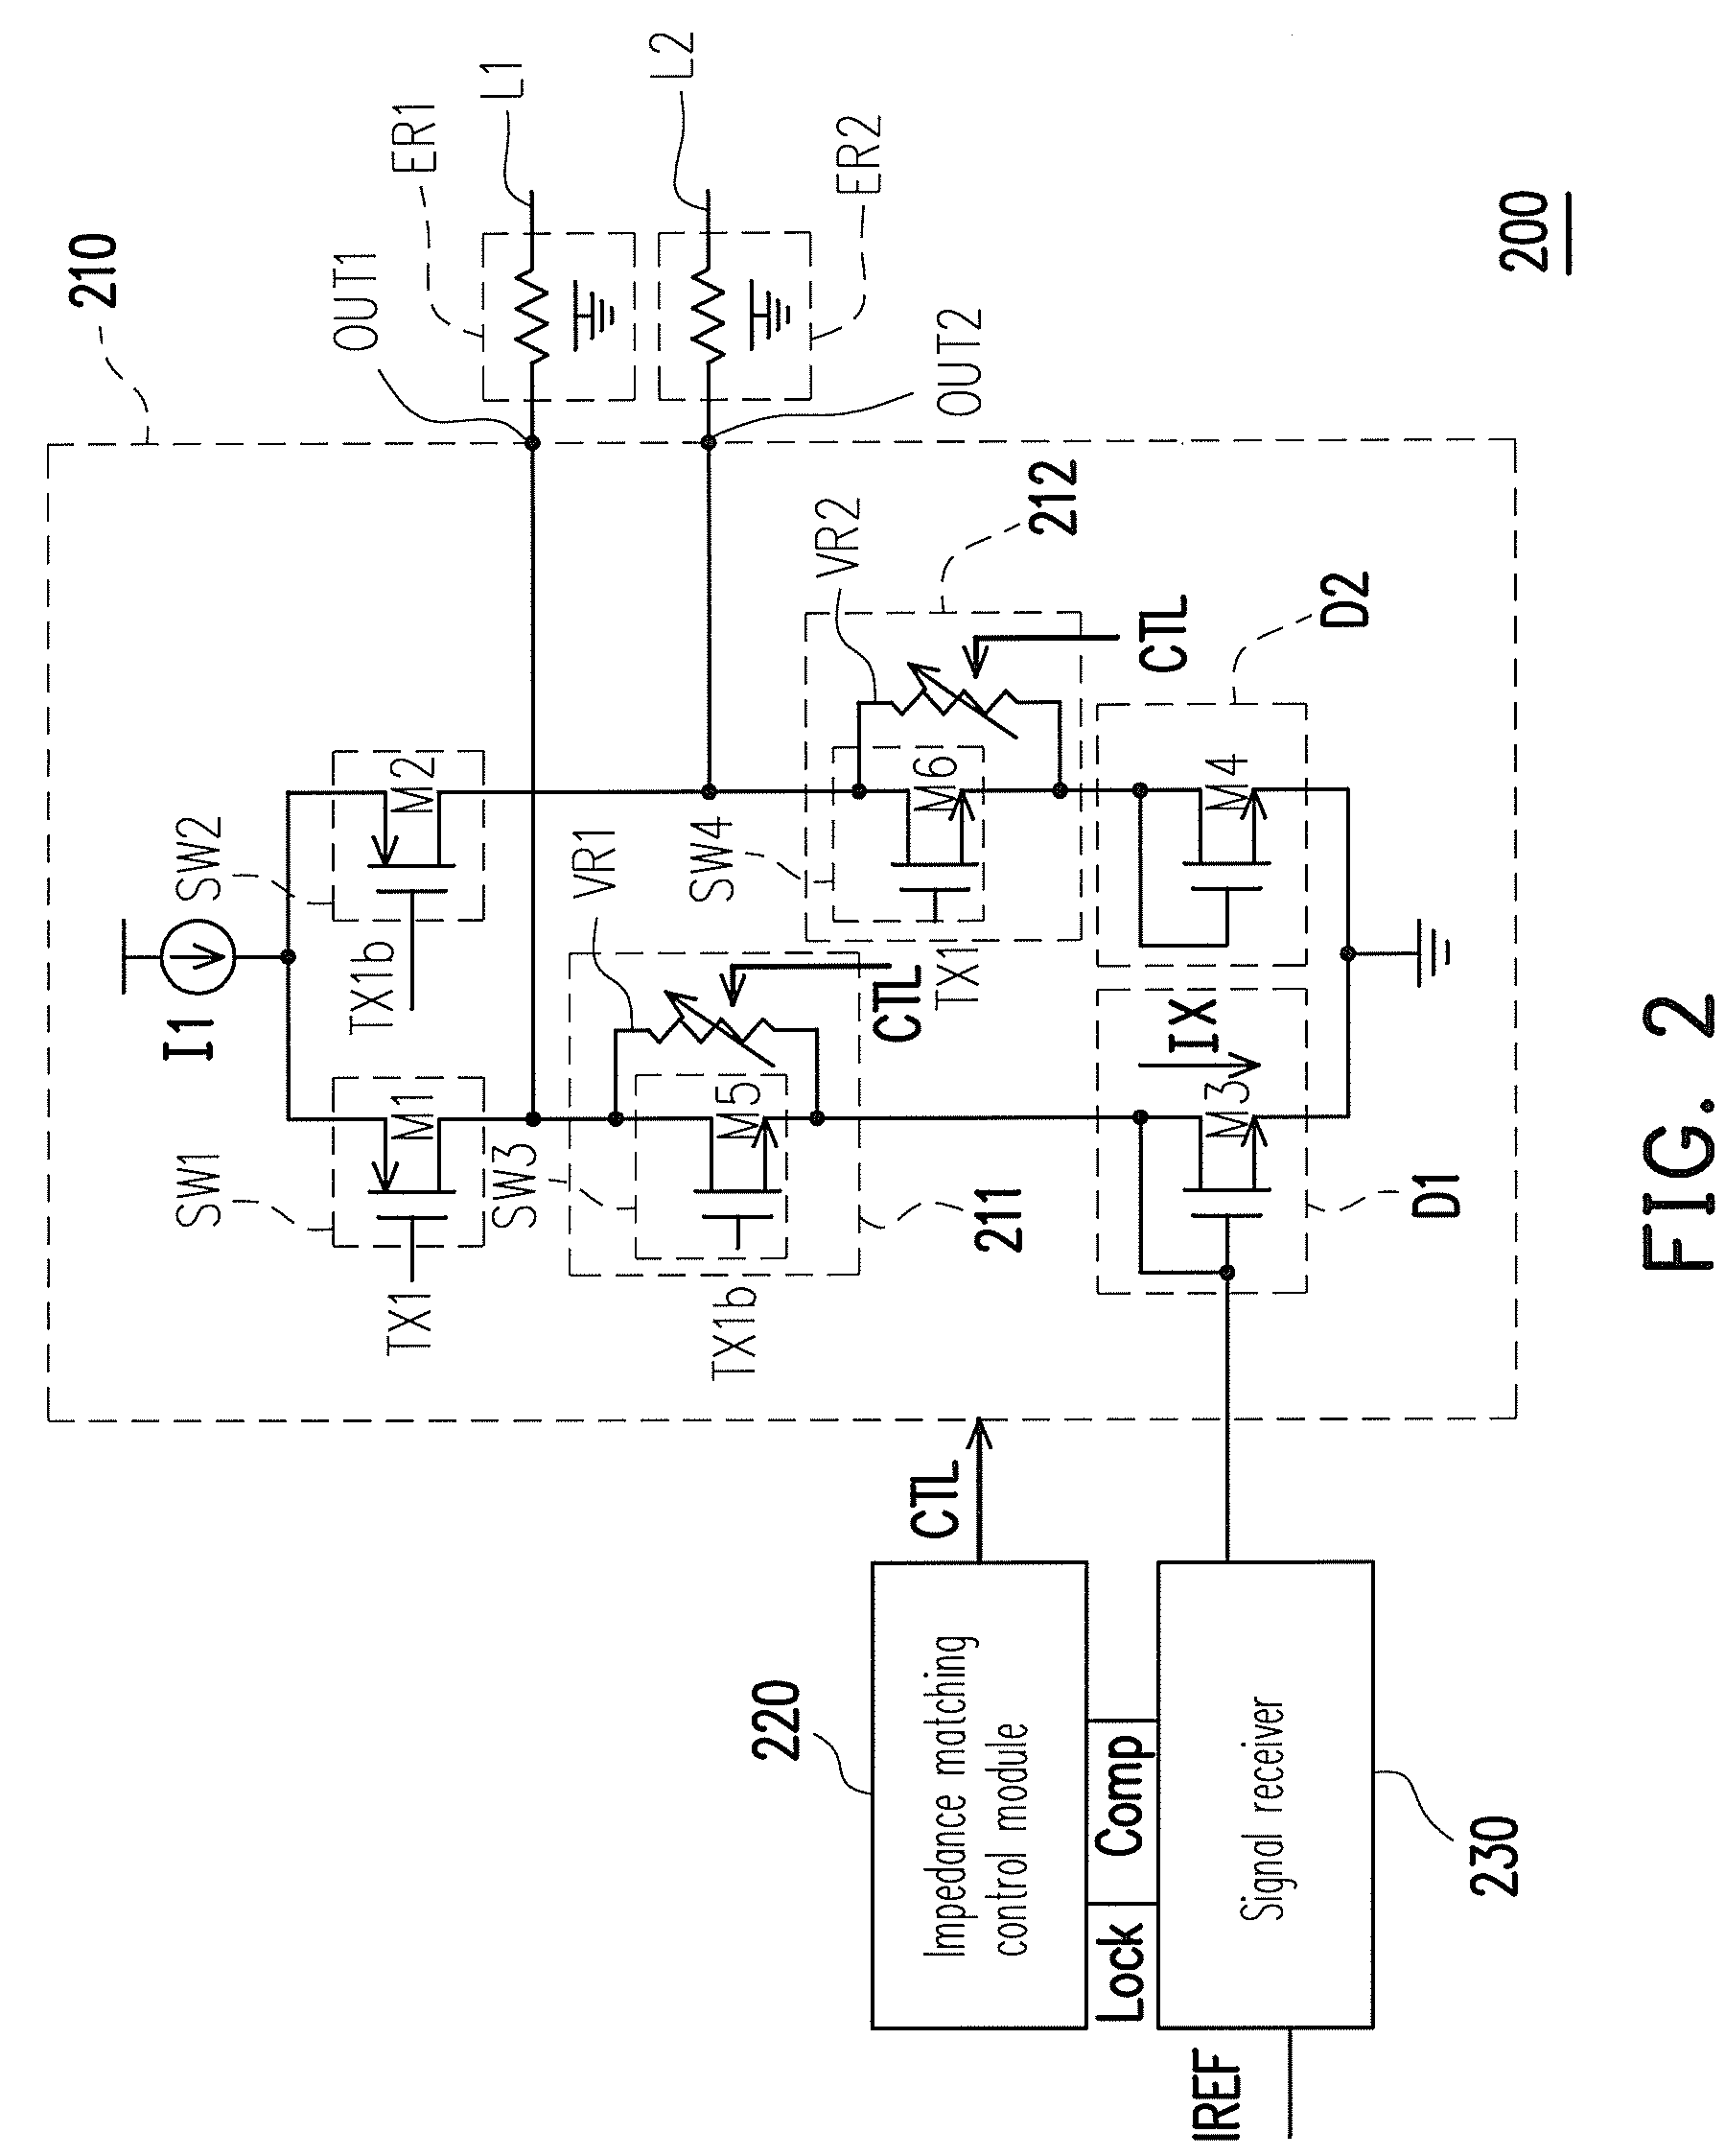 Signal transceiver apparatus and system